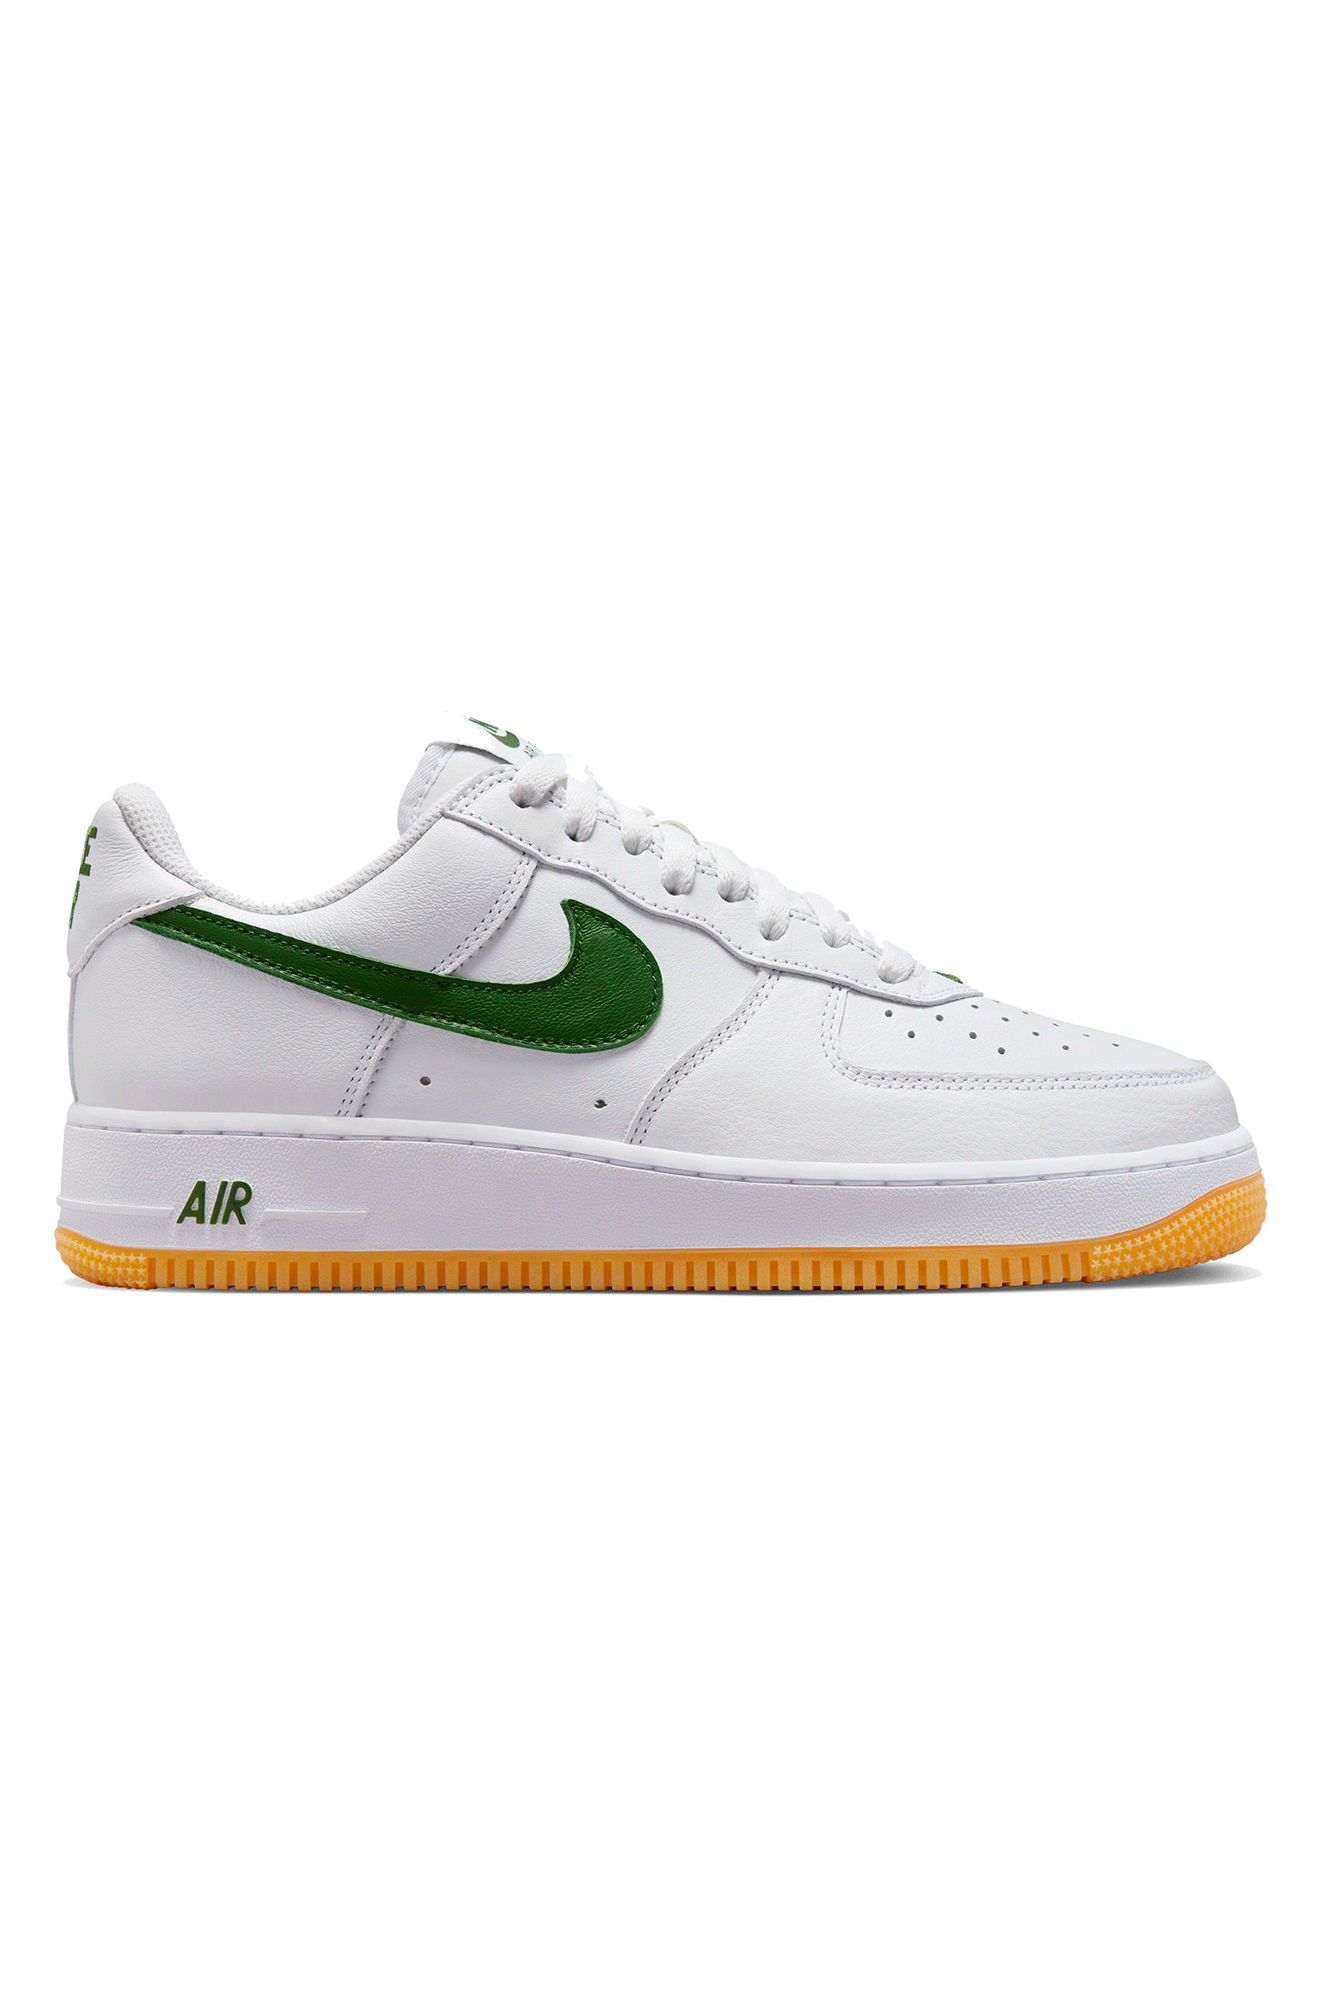 Air Force 1 Low Retro "Forest Green"